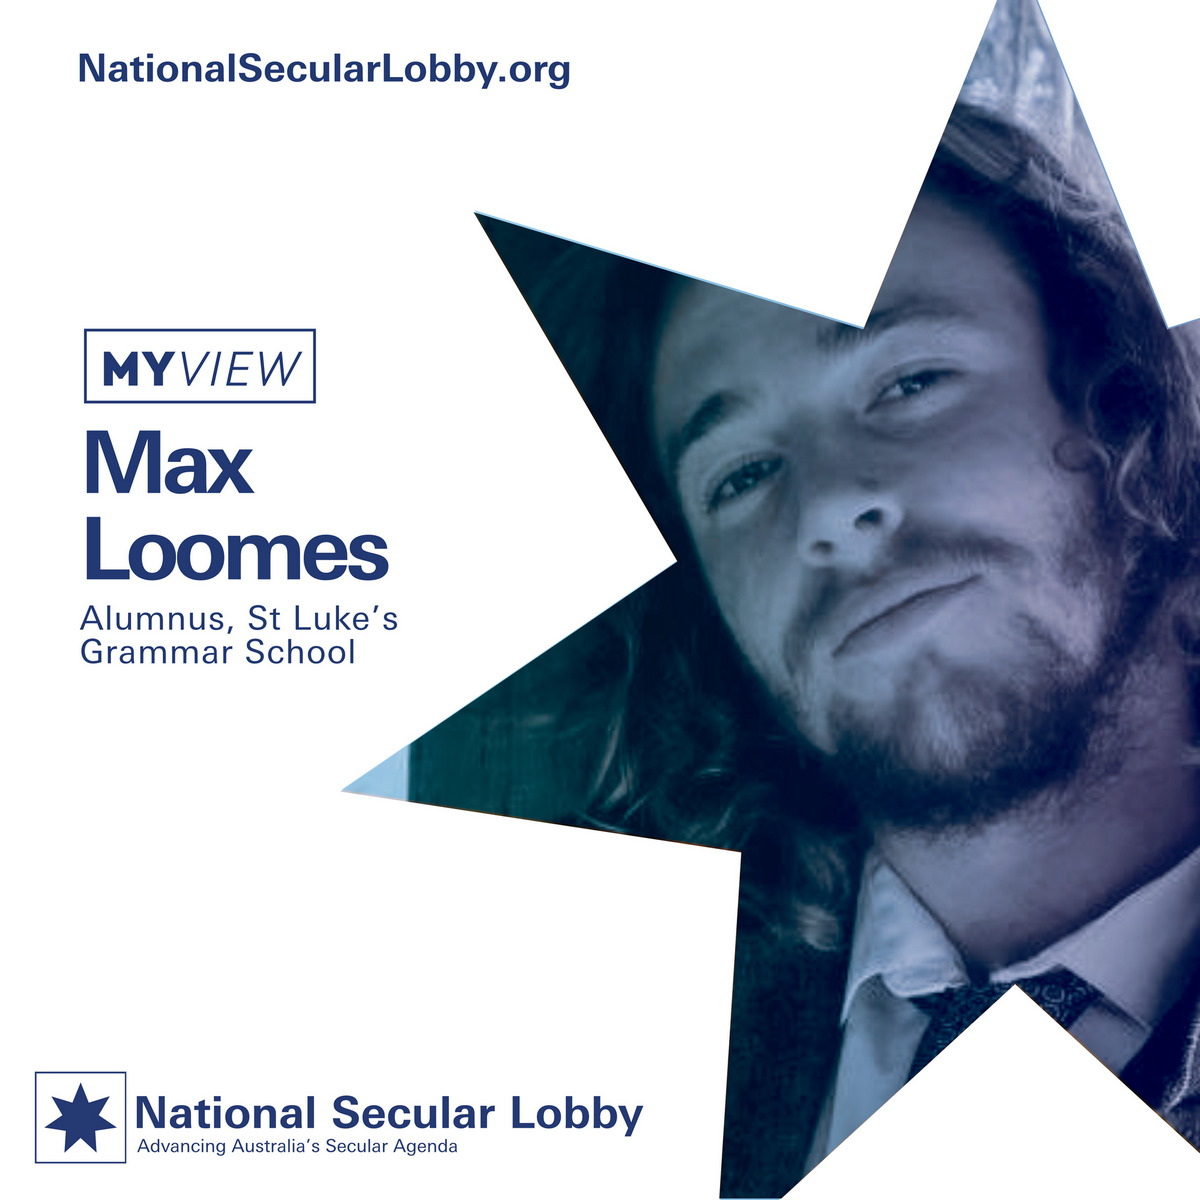 My View: Max Loomes